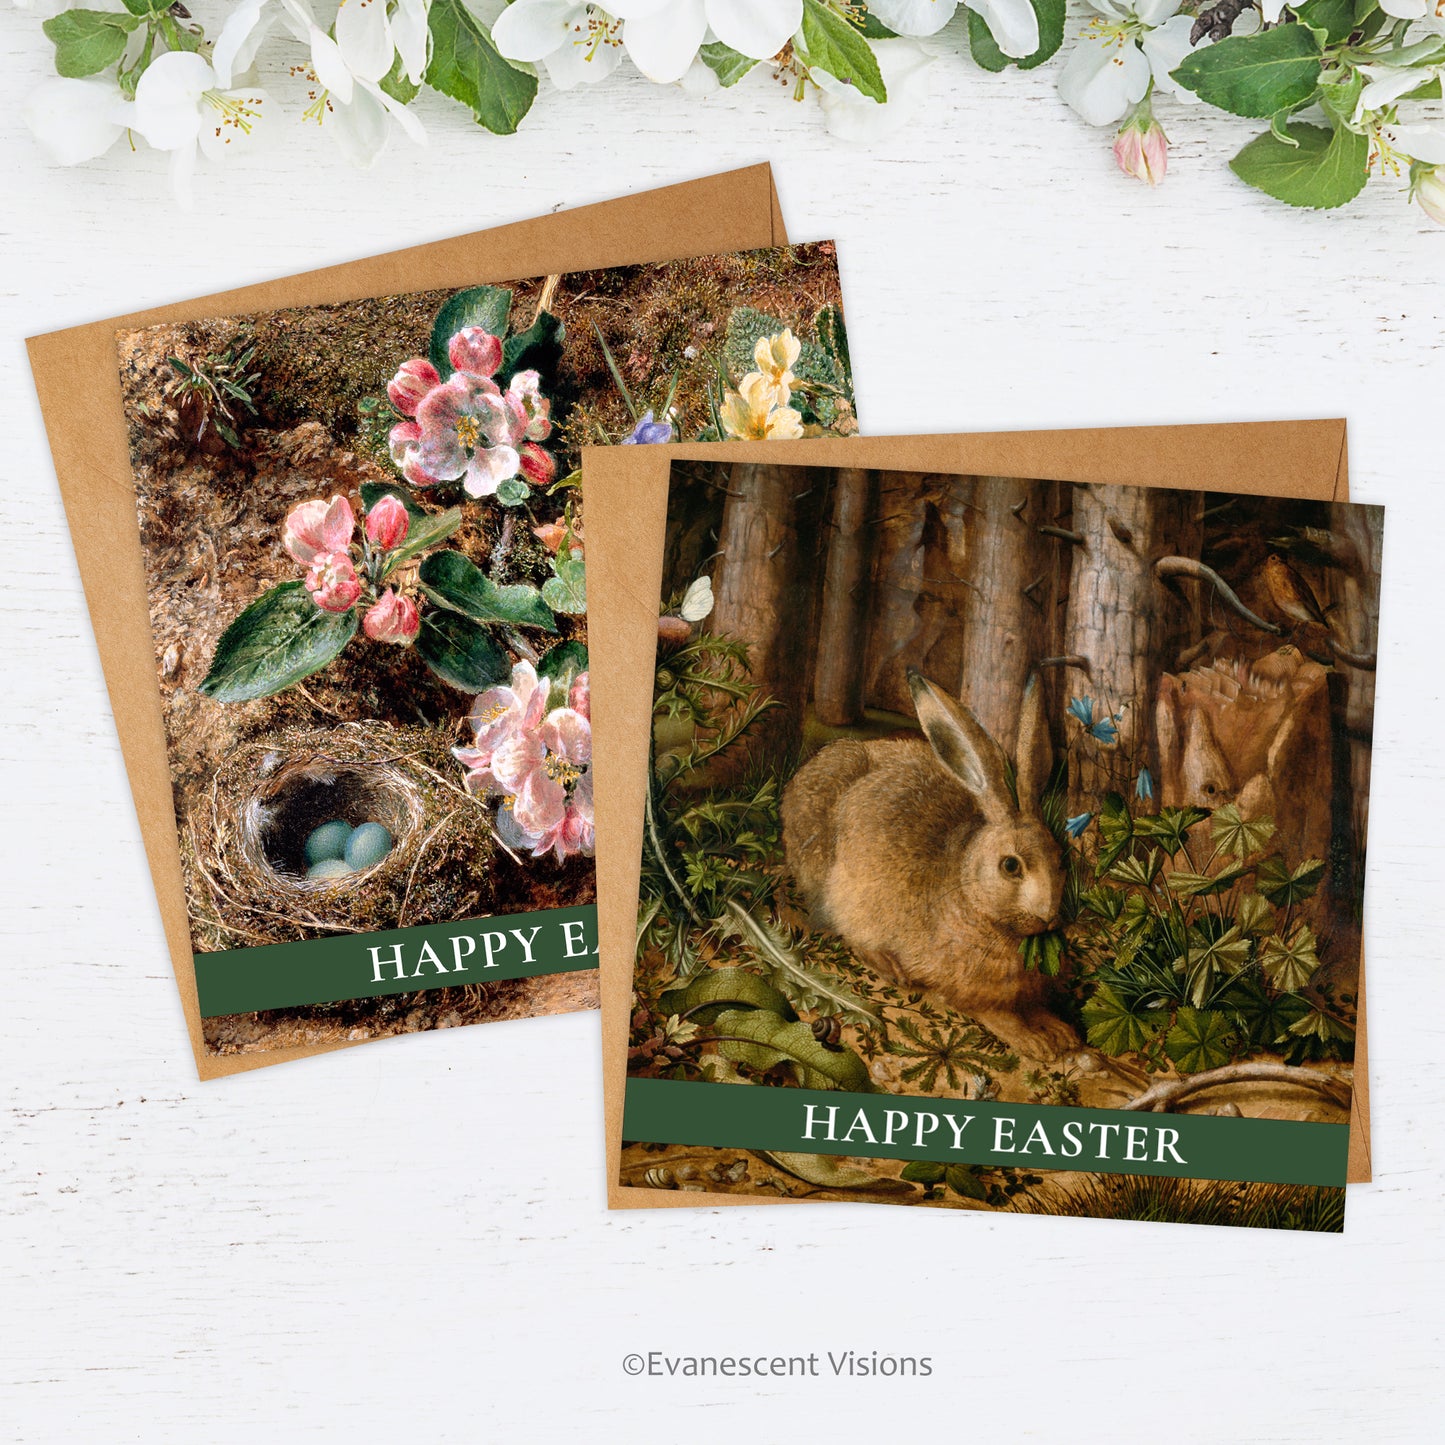 Happy Easter Cards and envelopes with designs from nature paintings,  'Birds Nest, Apple Blossom and Primroses' by William Henry Hunt and 'A Hare in the Forest' by Hans Hoffmann.